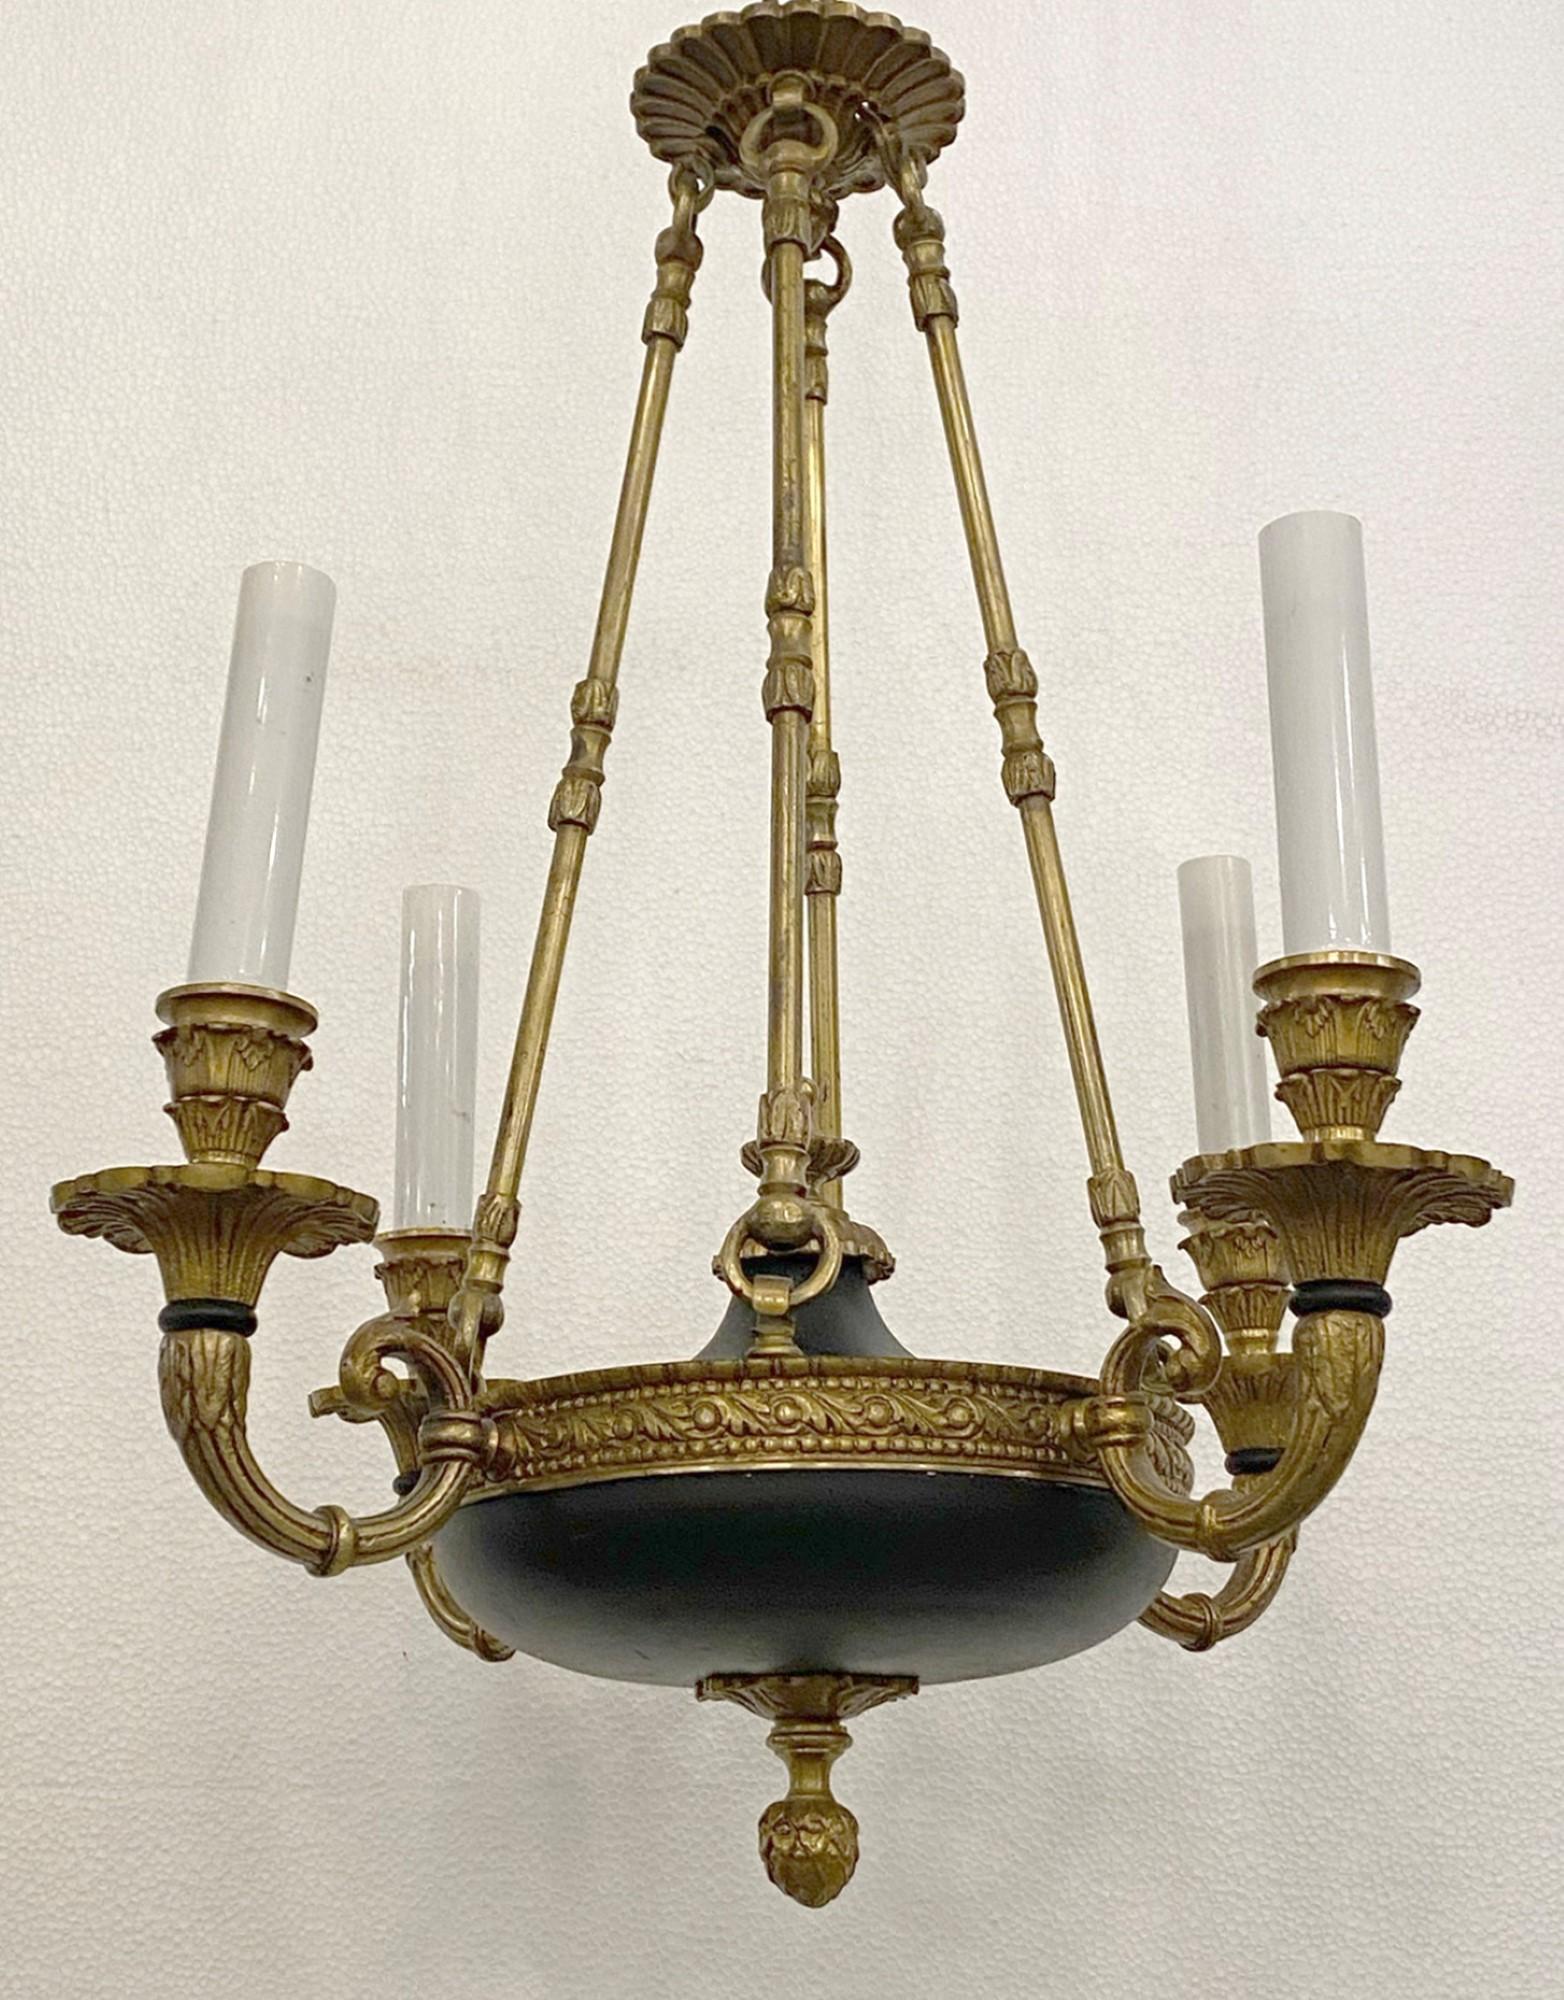 From the NYC Waldorf Astoria Hotel Towers on Park Ave in NYC, this 1940s cast brass Empire chandelier features 4 candelabra lights. Retrieved from the 37th floor of the Waldorf Towers. A Waldorf Astoria authenticity card included with your purchase.